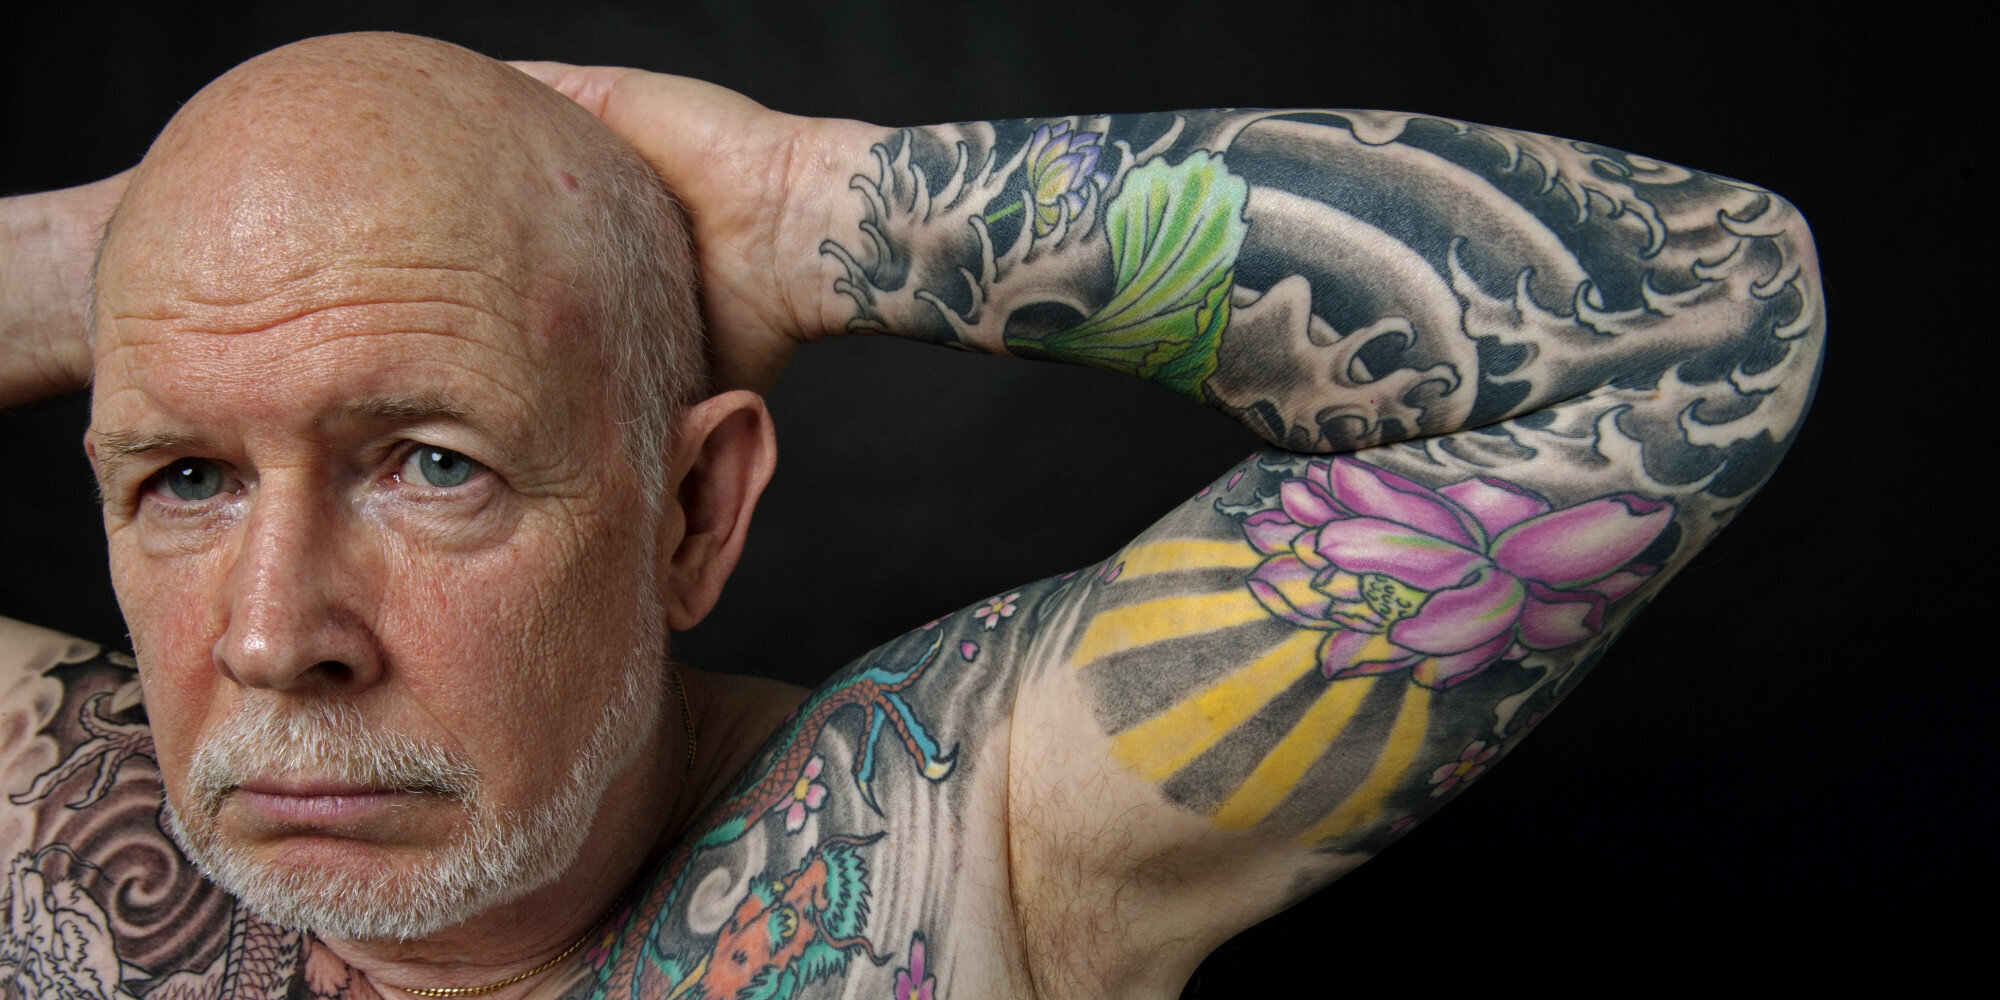 103 Photos Of Aged Tattoos That Show How The Ink Changes Over The Years   Bored Panda